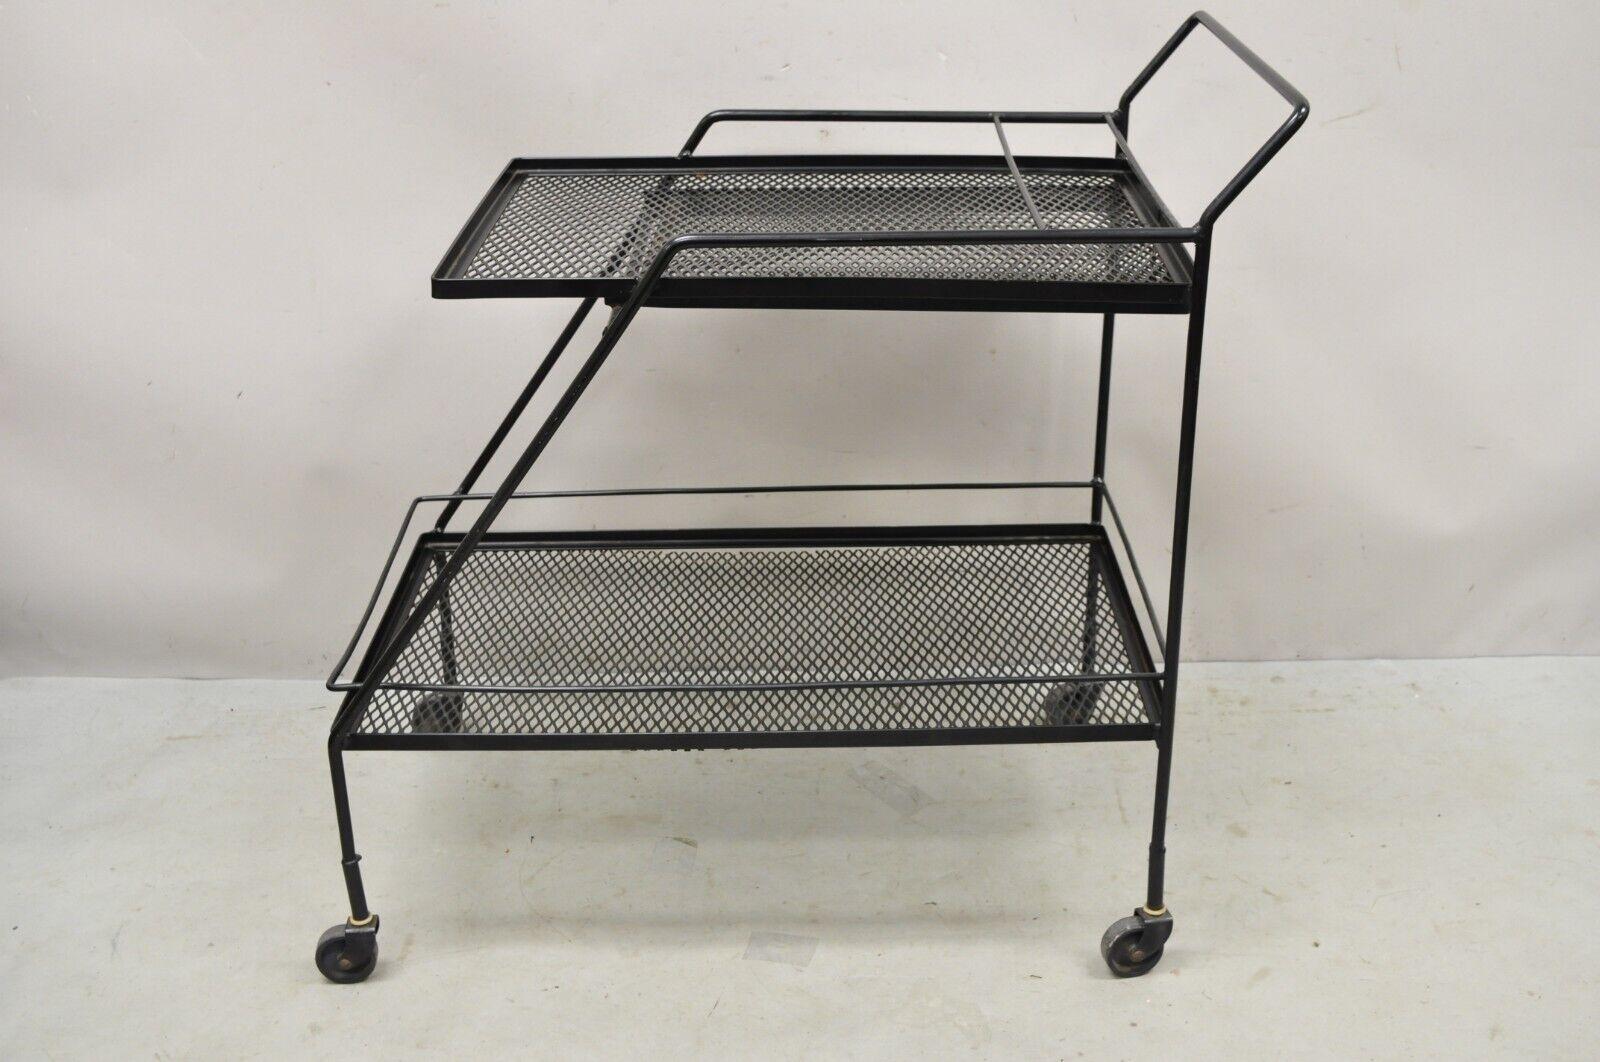 Vintage Mathieu Mategot Style Black Wrought Iron 2 Tier Modern Bar Cart Trolley. Item features a removable serving tray, 2 tiers, metal mesh iron frame, black finish, wrought iron construction, very nice vintage item, clean modernist lines, great